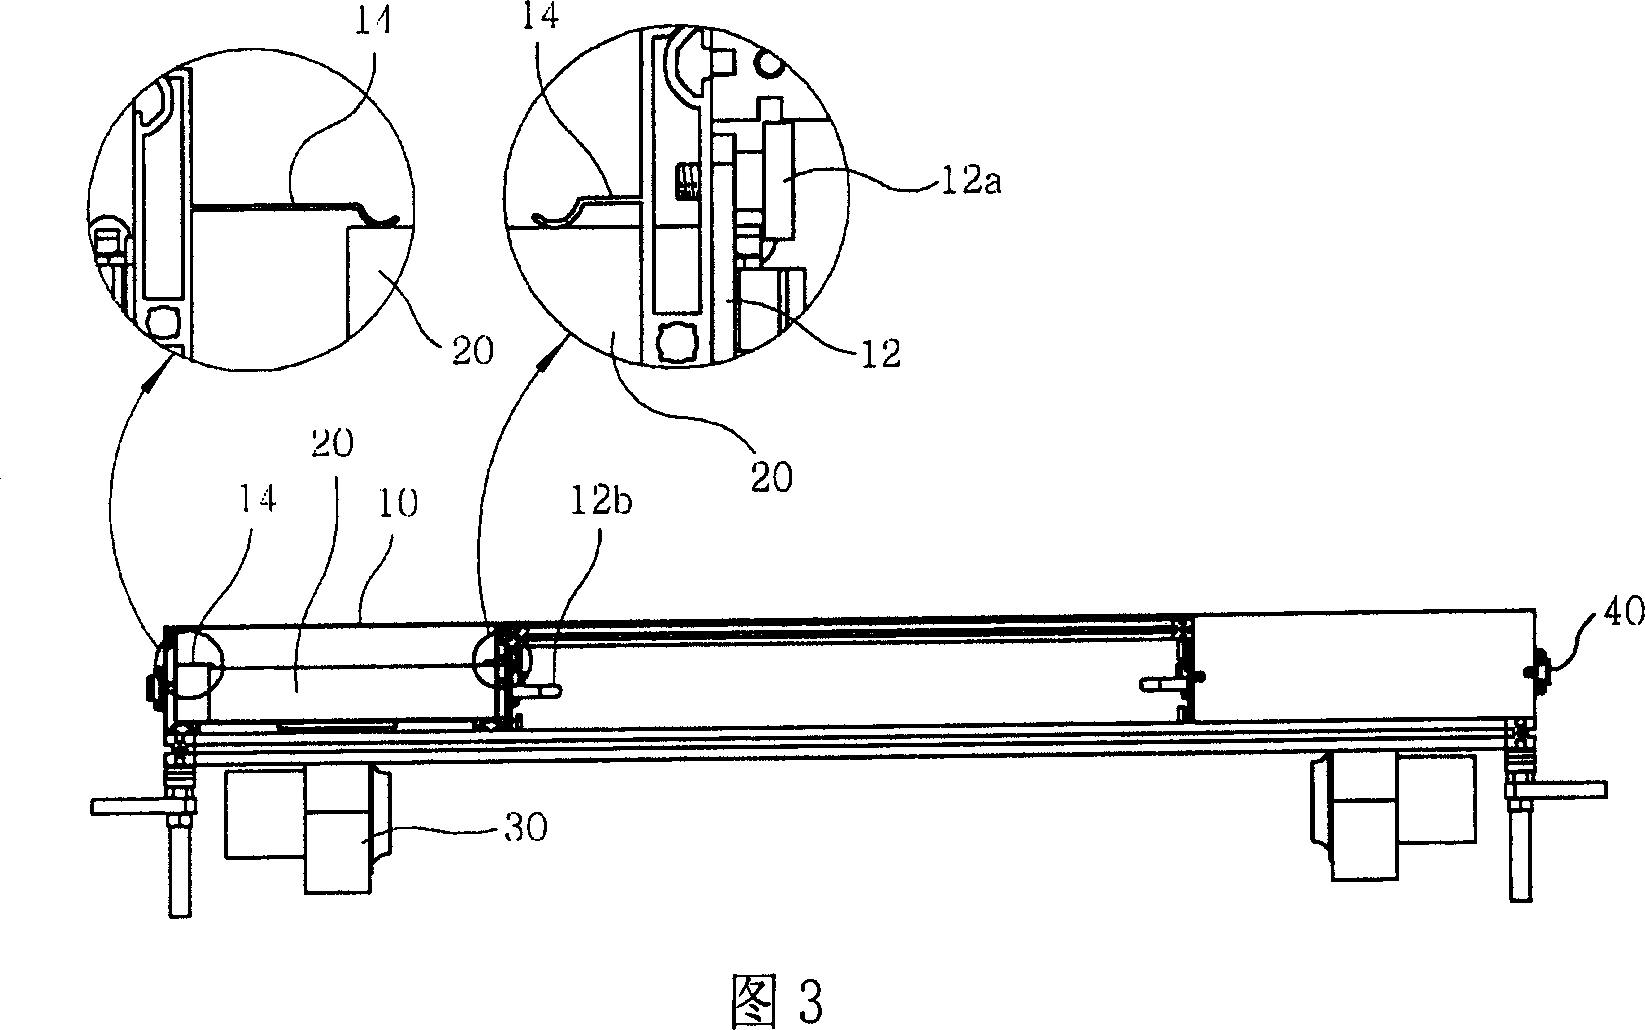 Filter mounting structure of glass panel transferring device